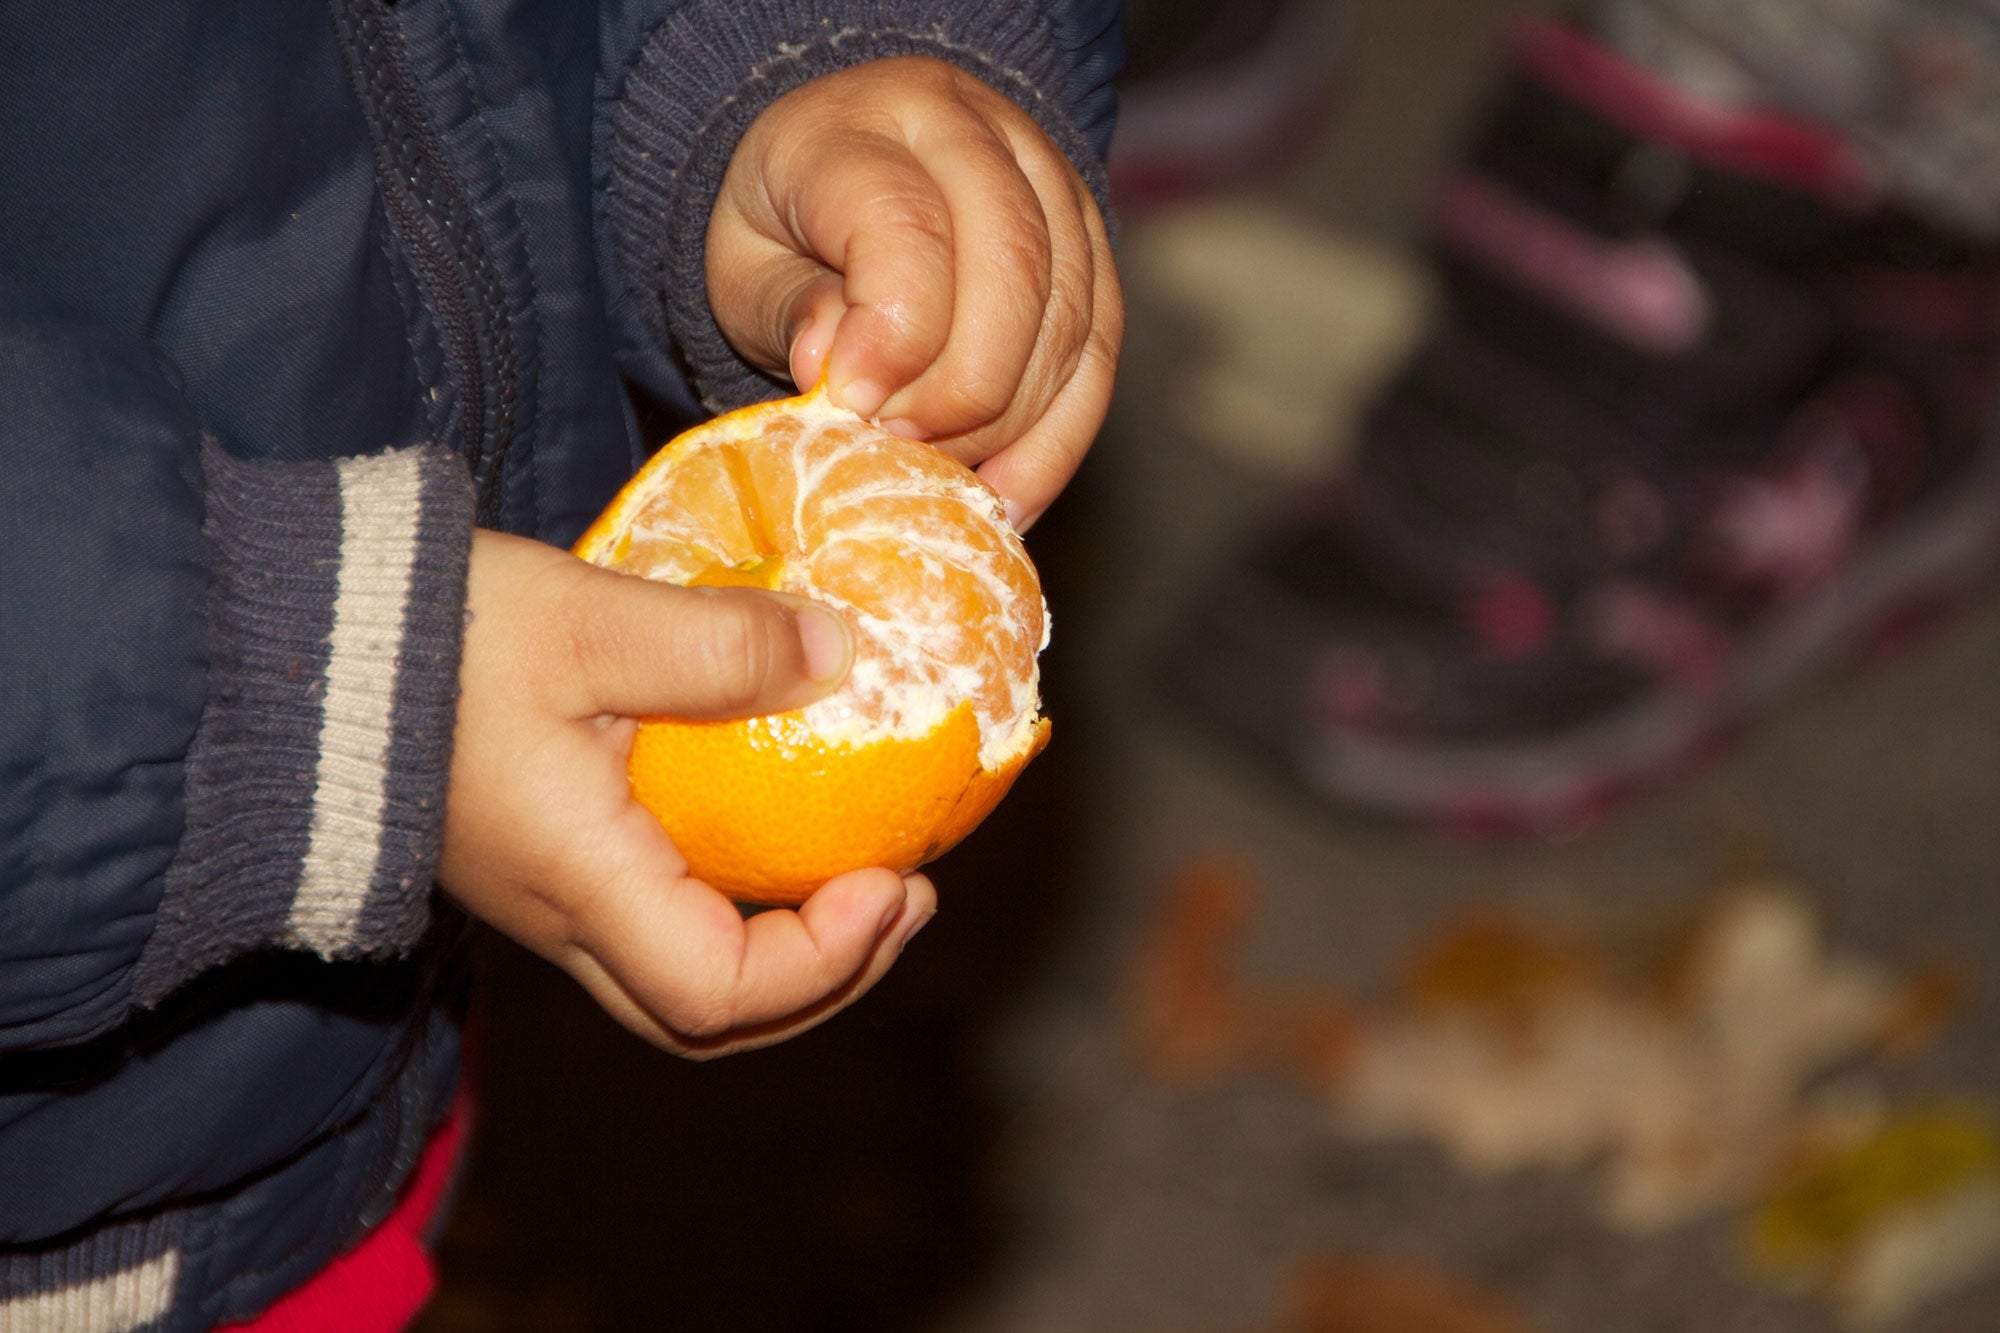 A small toddler stands outside in a blue winter coat, holding a clementine orange in one hand while carefully peeling it with the other.